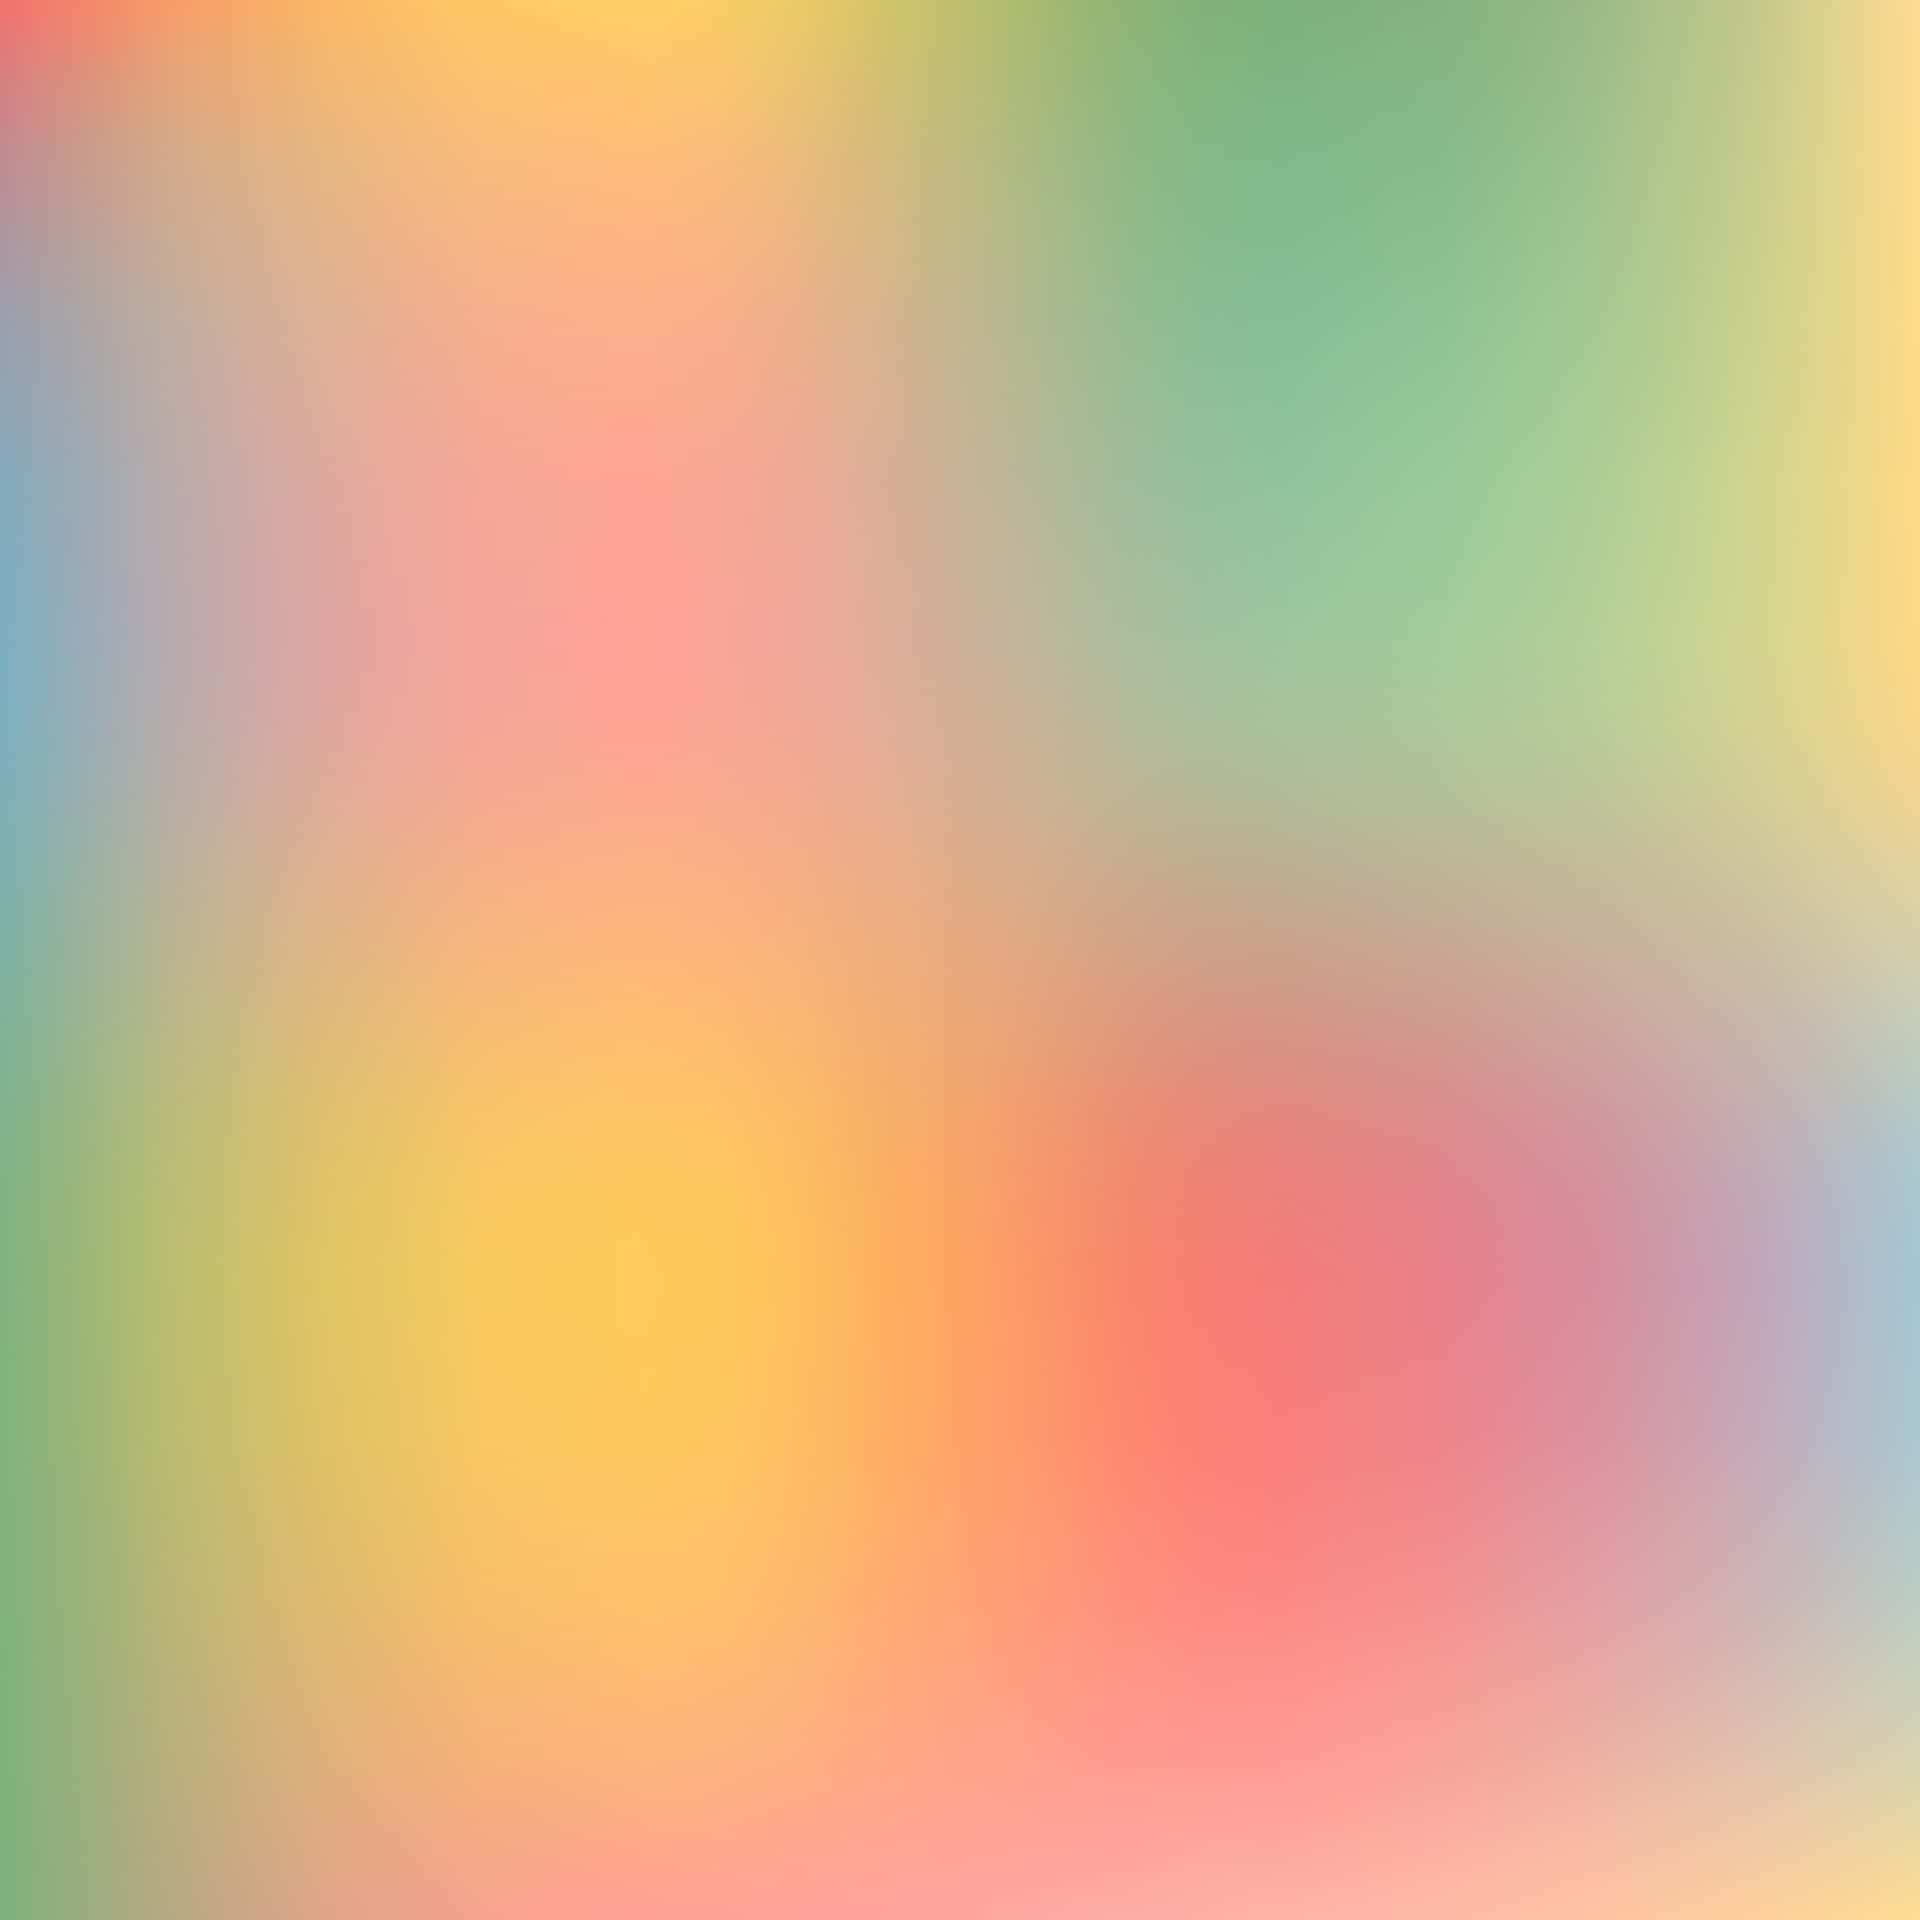 Colorful Abstract Image Wallpaper